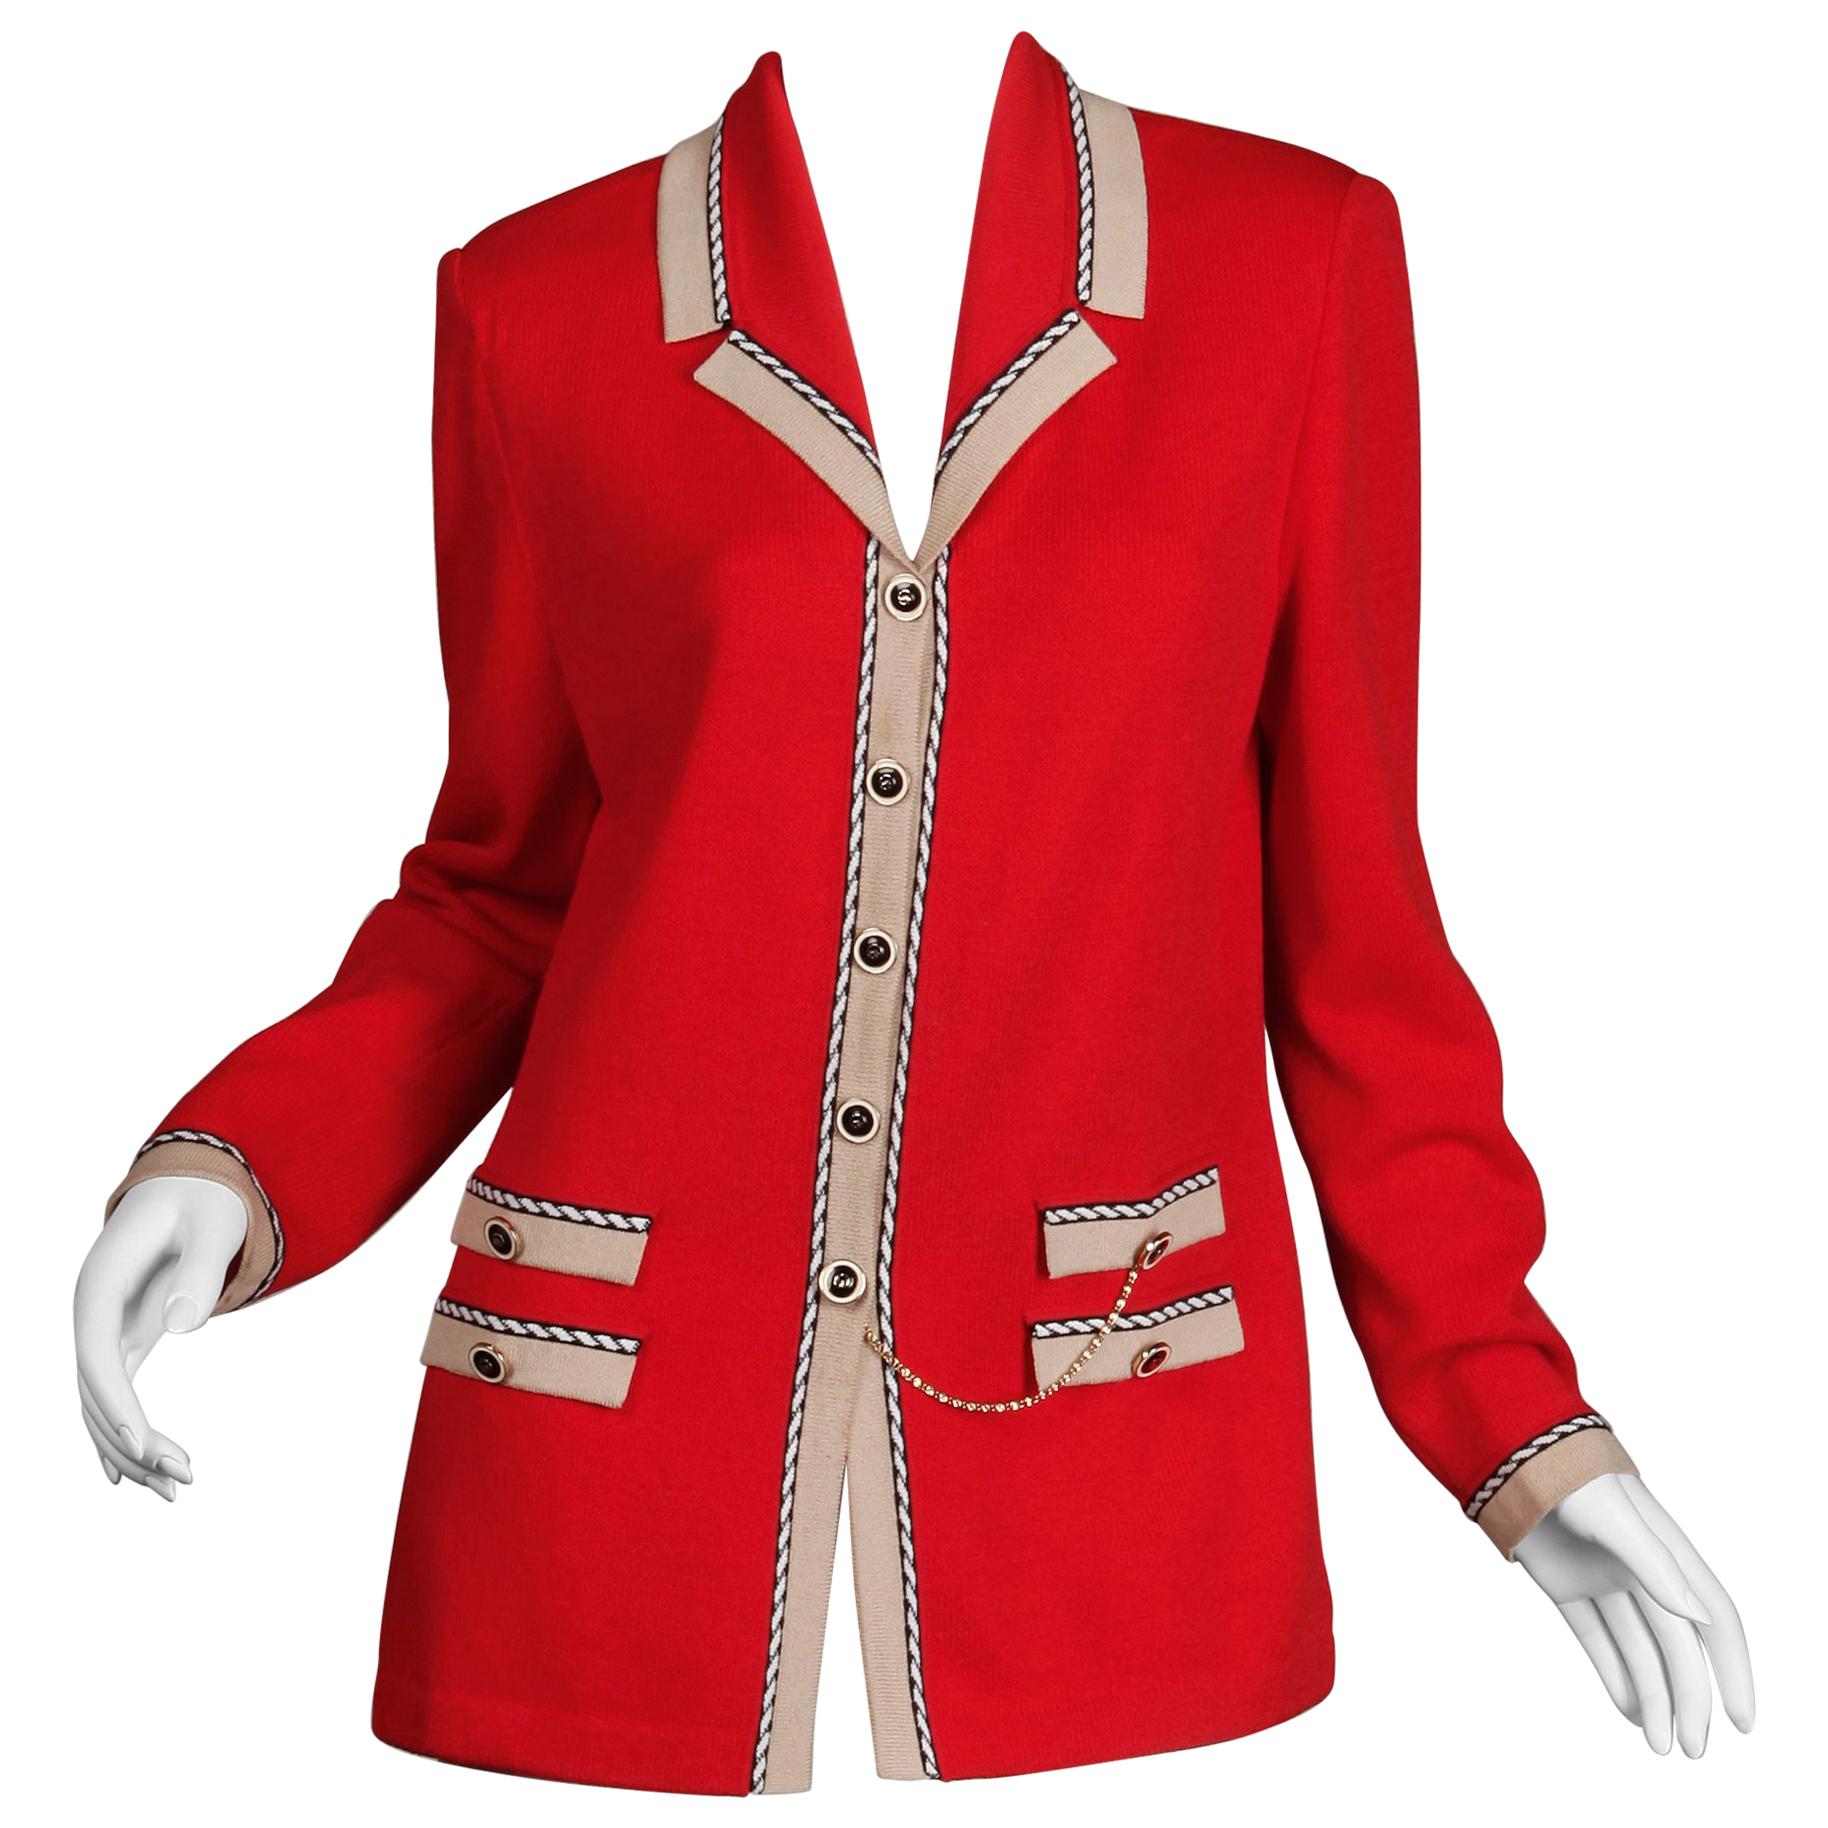 St. John by Marie Gray Vintage Military Red Knit Cardigan Sweater Jacket